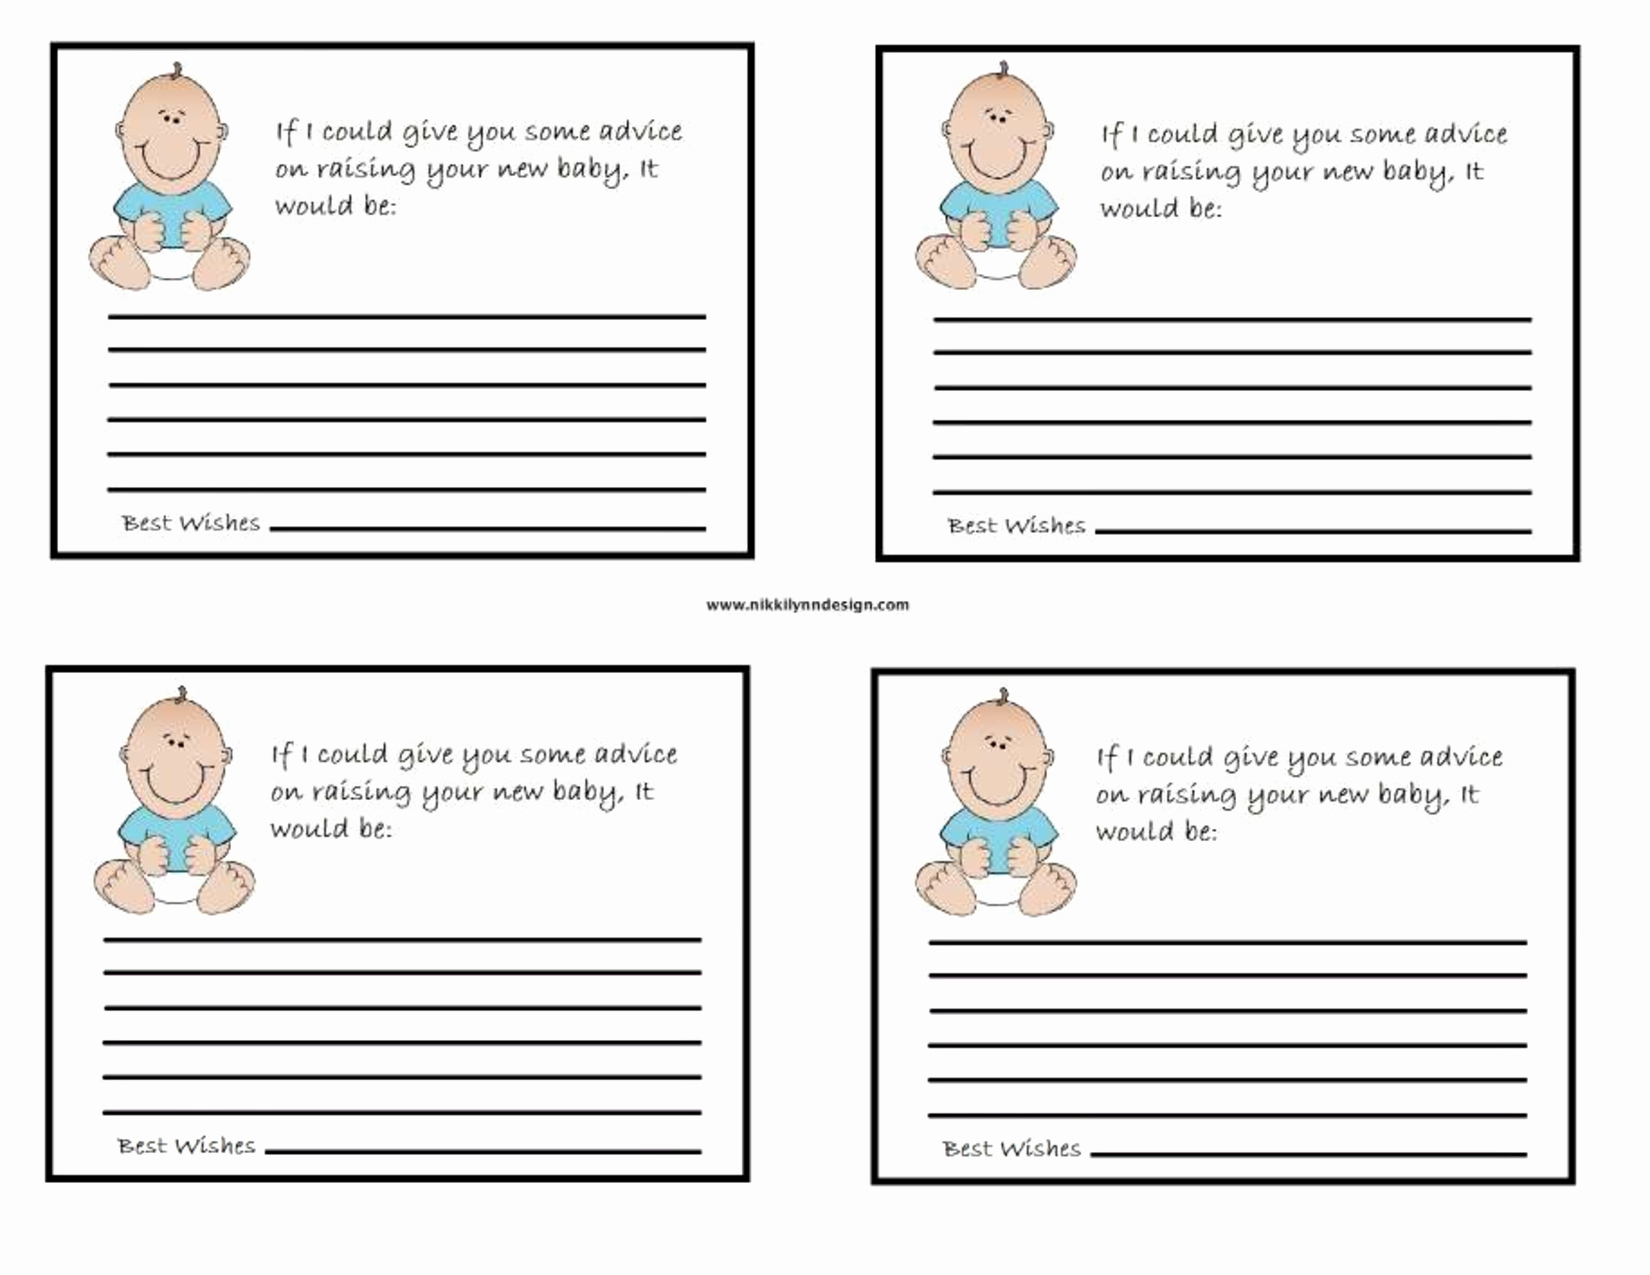 Wishes for Baby Template Beautiful Free Baby Advice Cards Template Entertaining